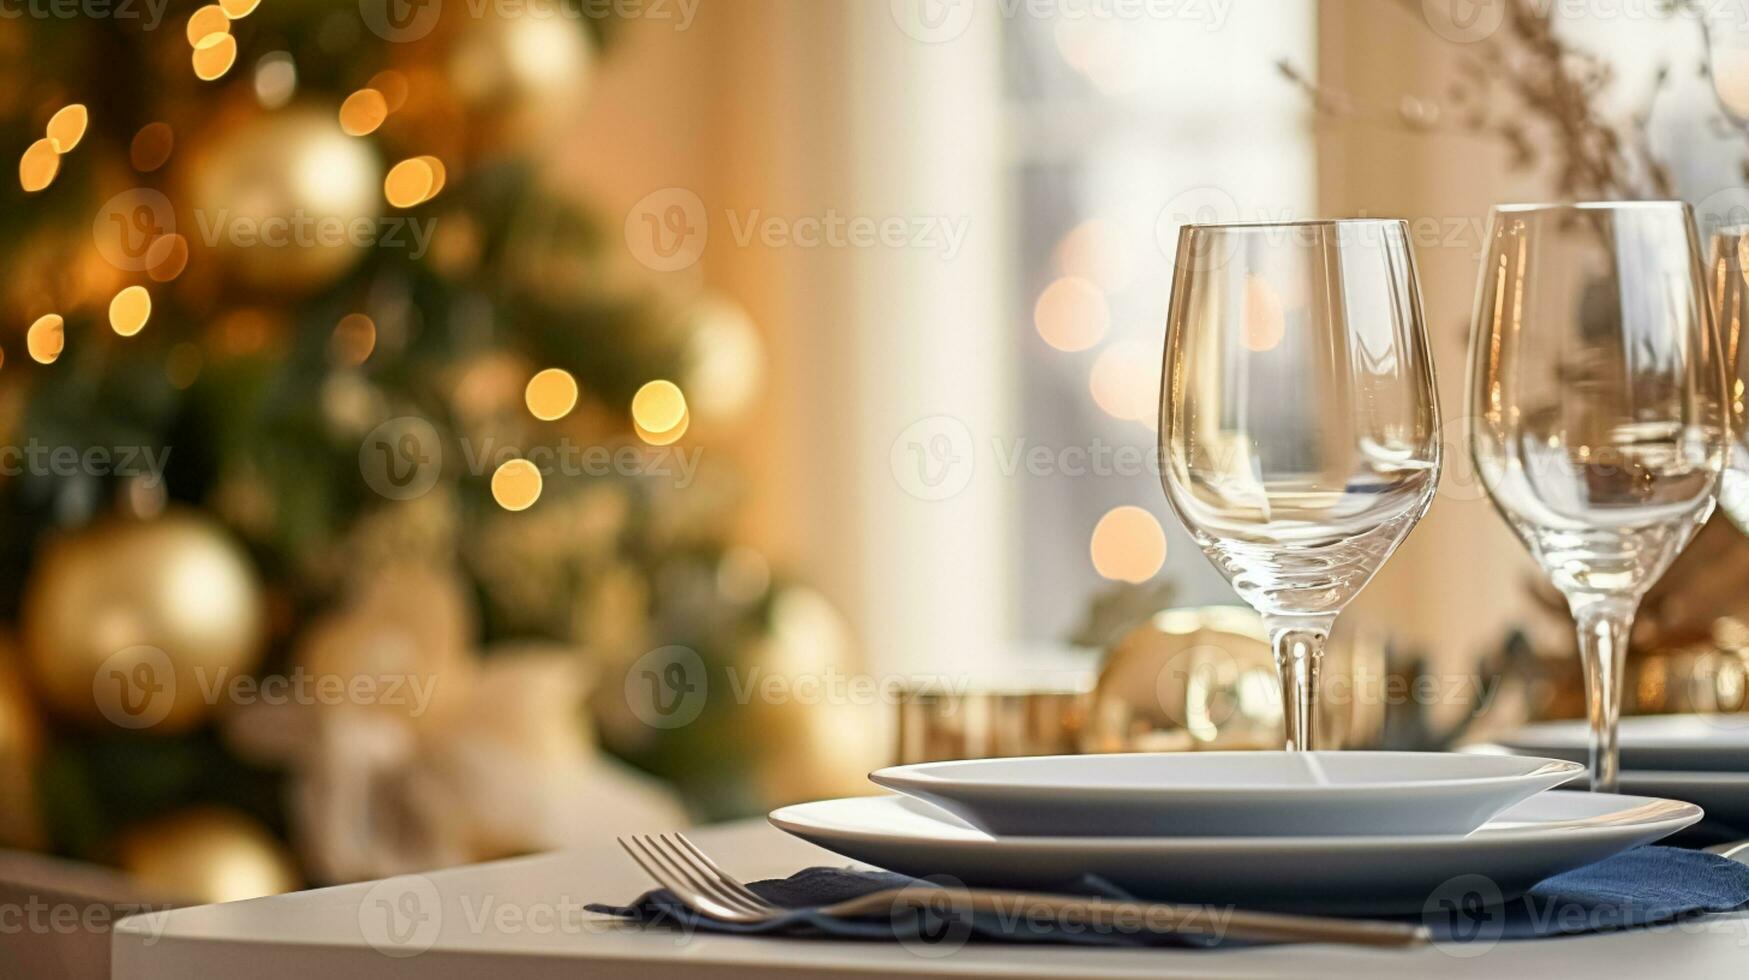 Christmas holiday family breakfast, table setting decor and festive tablescape, English country and home styling photo